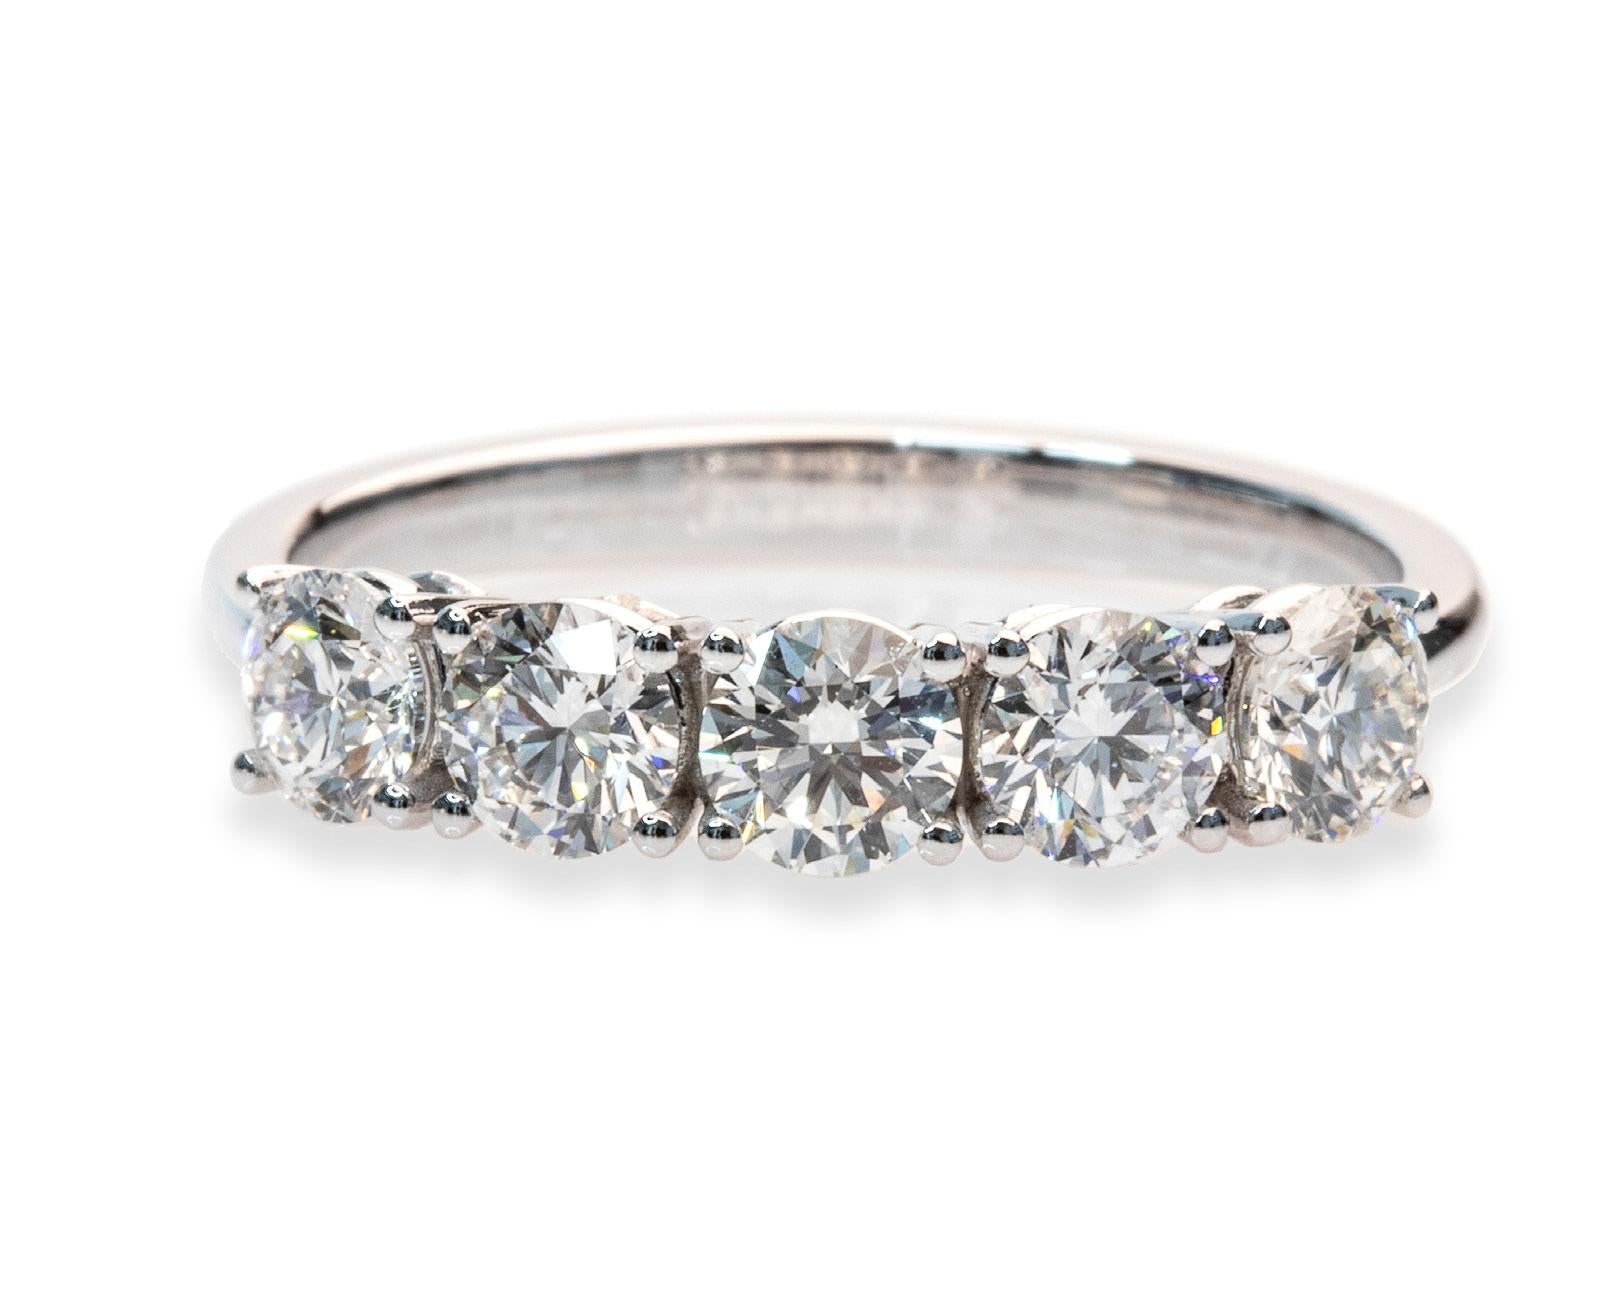 Presenting the exquisite 1.50 Carat in total, E-F per color VS per Clarity 18K White Gold 5 Diamonds Round Brilliant Cut Half Band Ring, a refined and versatile piece crafted to captivate.

This stunning band ring features five brilliant round